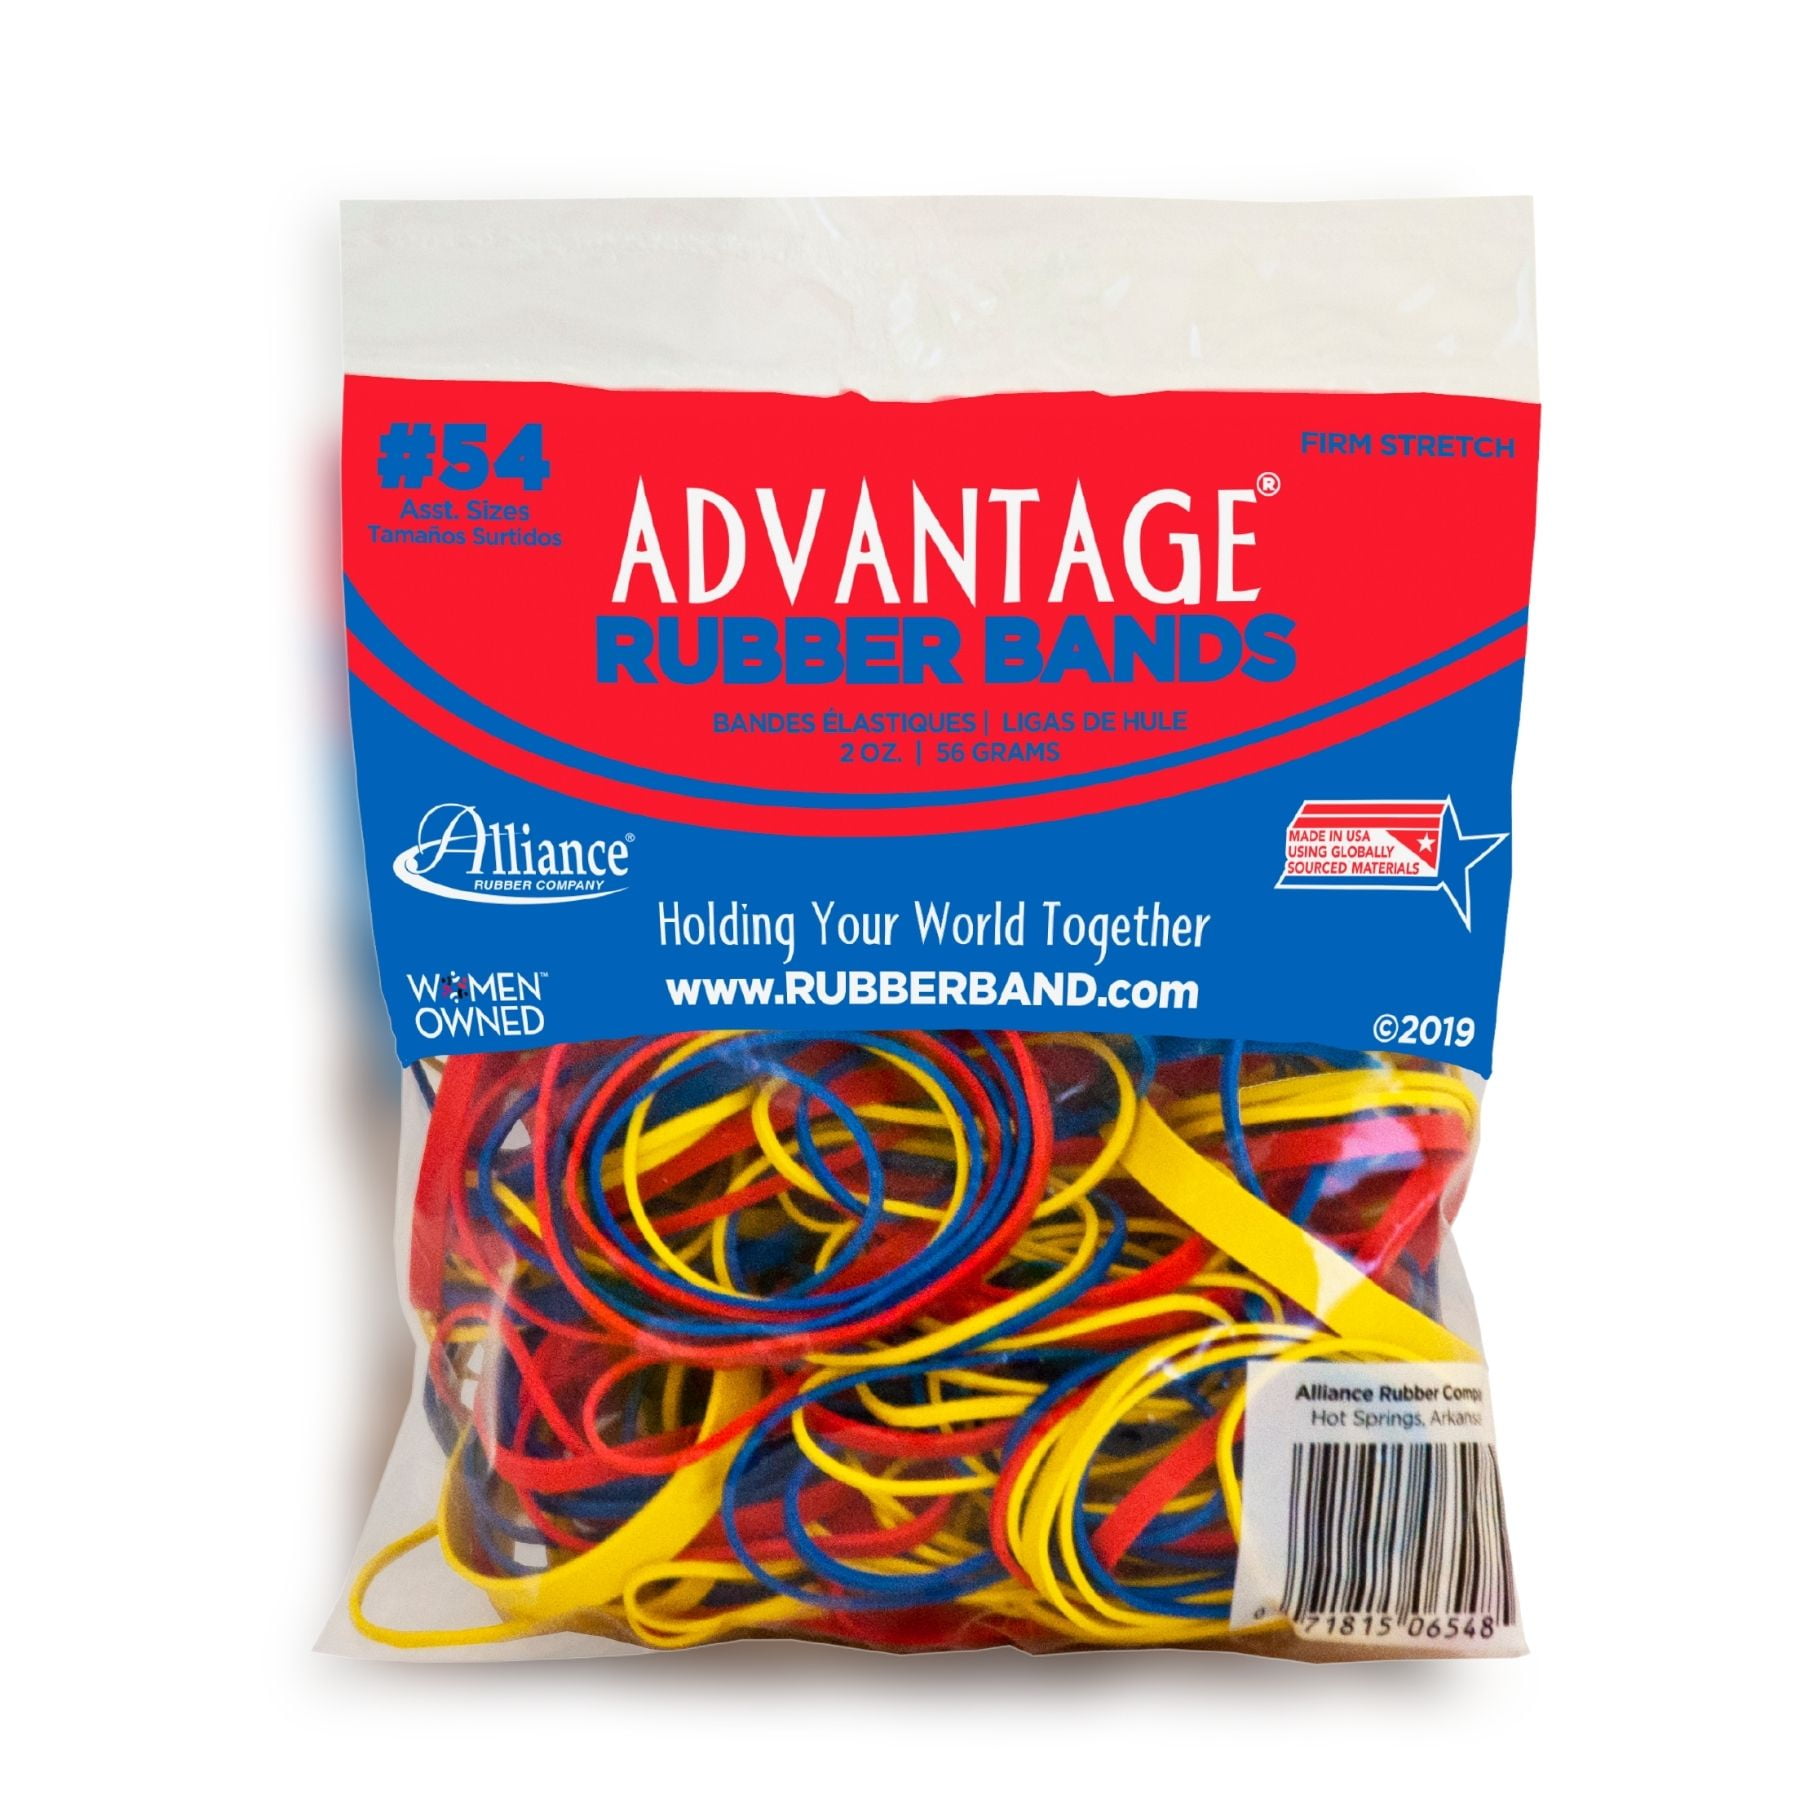 RUBBER BANDS 454g 1lb strong elastic many various sizes available free deliveryN 